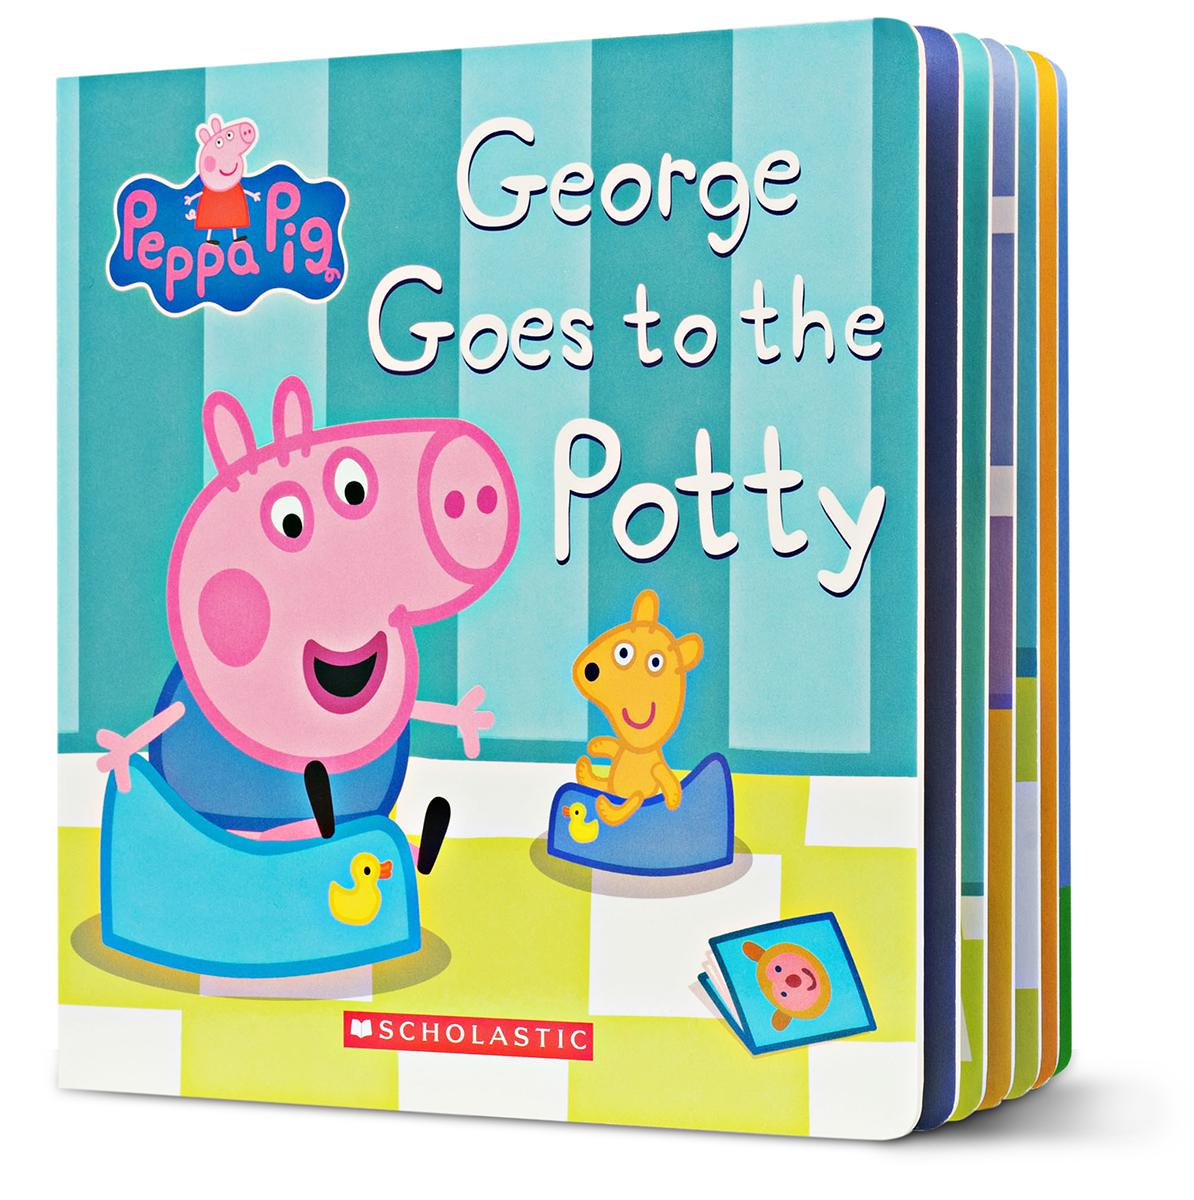  Peppa Pig: George goes to the potty 